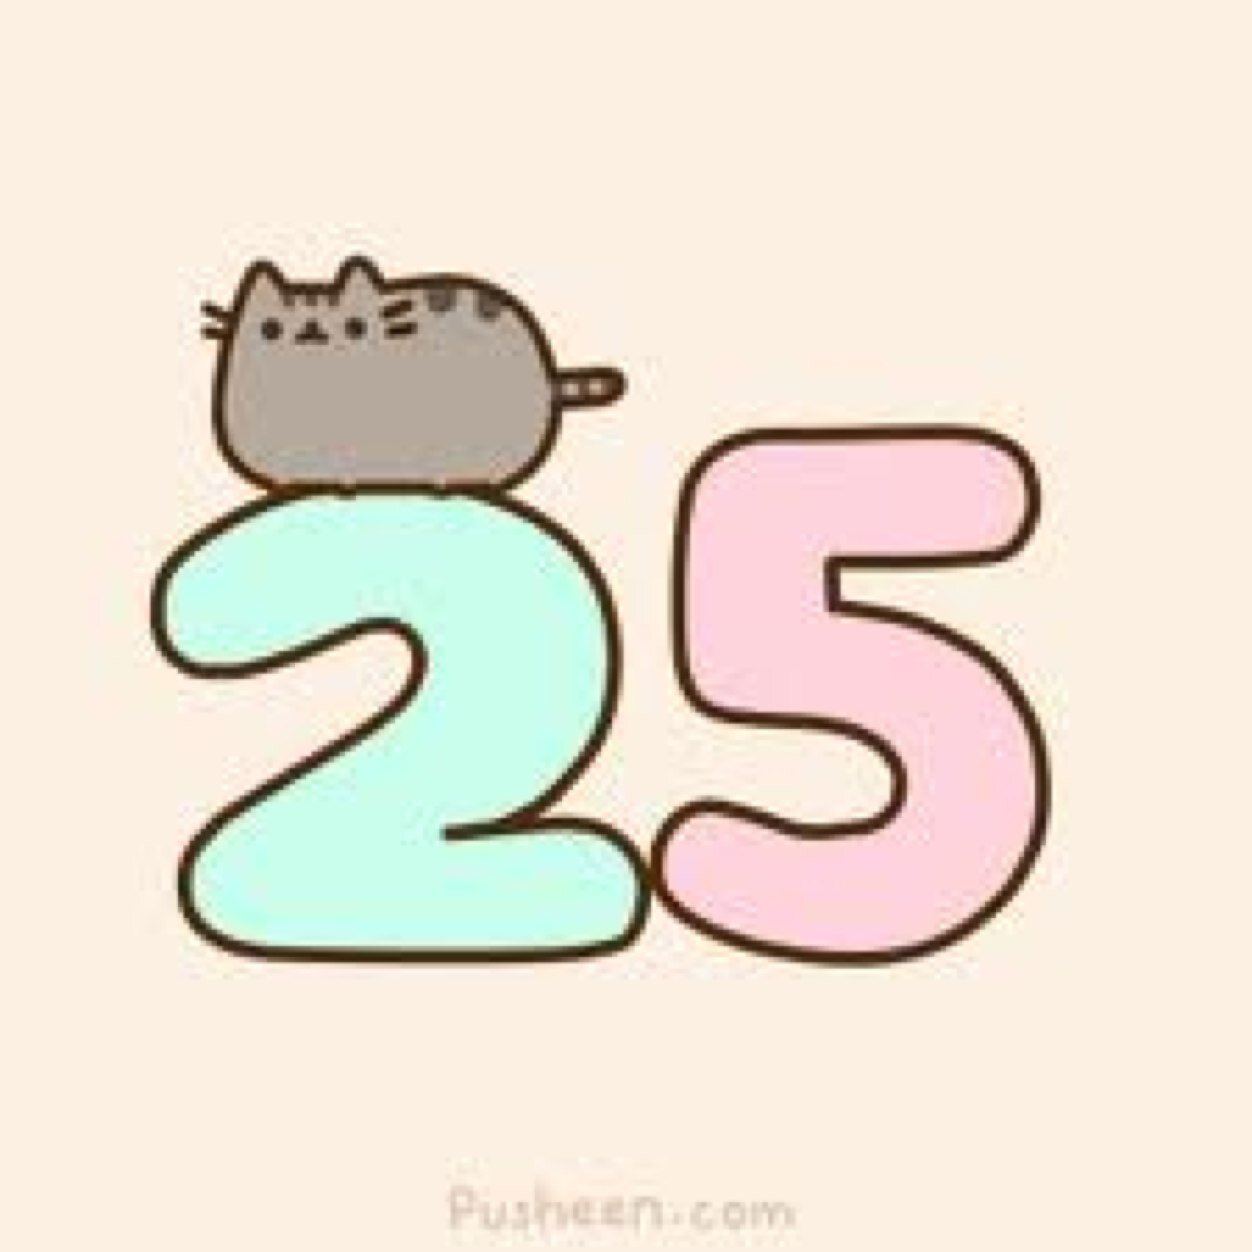 Just two girls crazy about 25. (JOKE ACCOUNT)